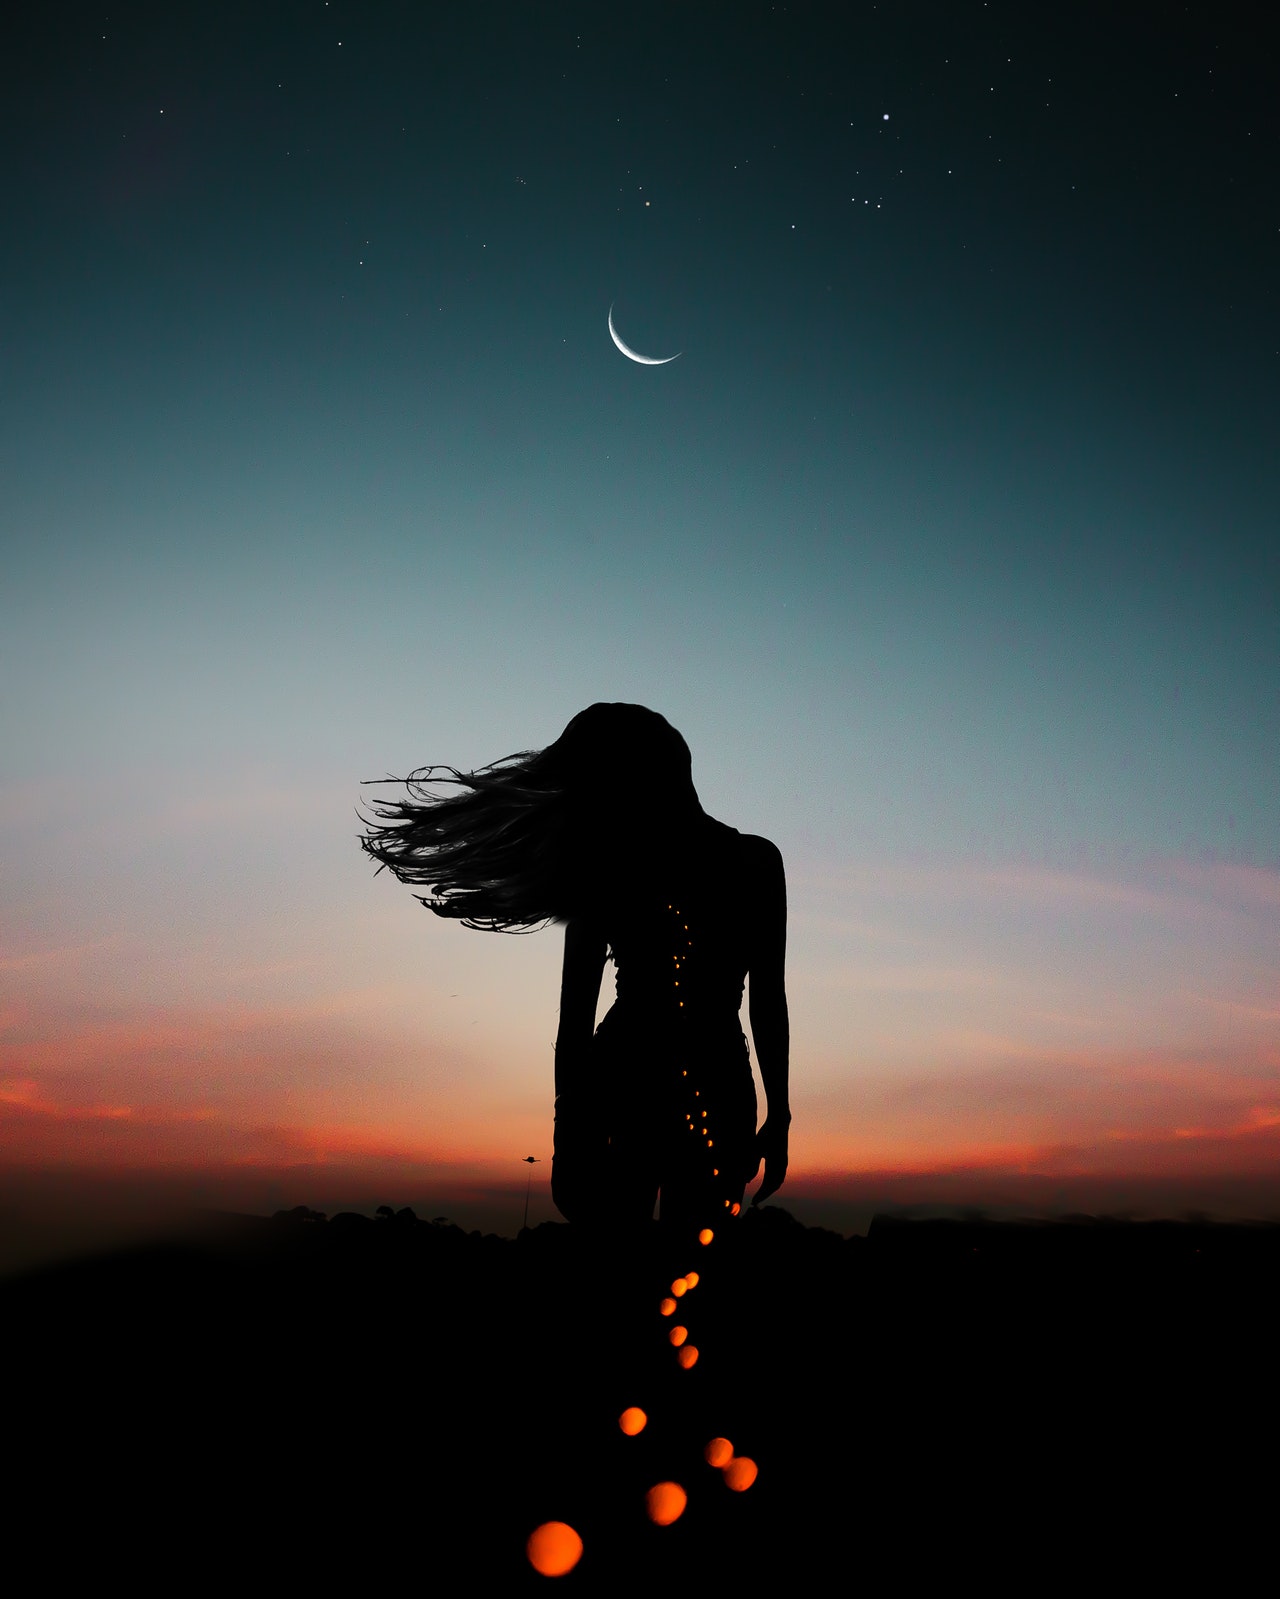 Woman standing in the night under the new moon - freedom, spirituality, liberation